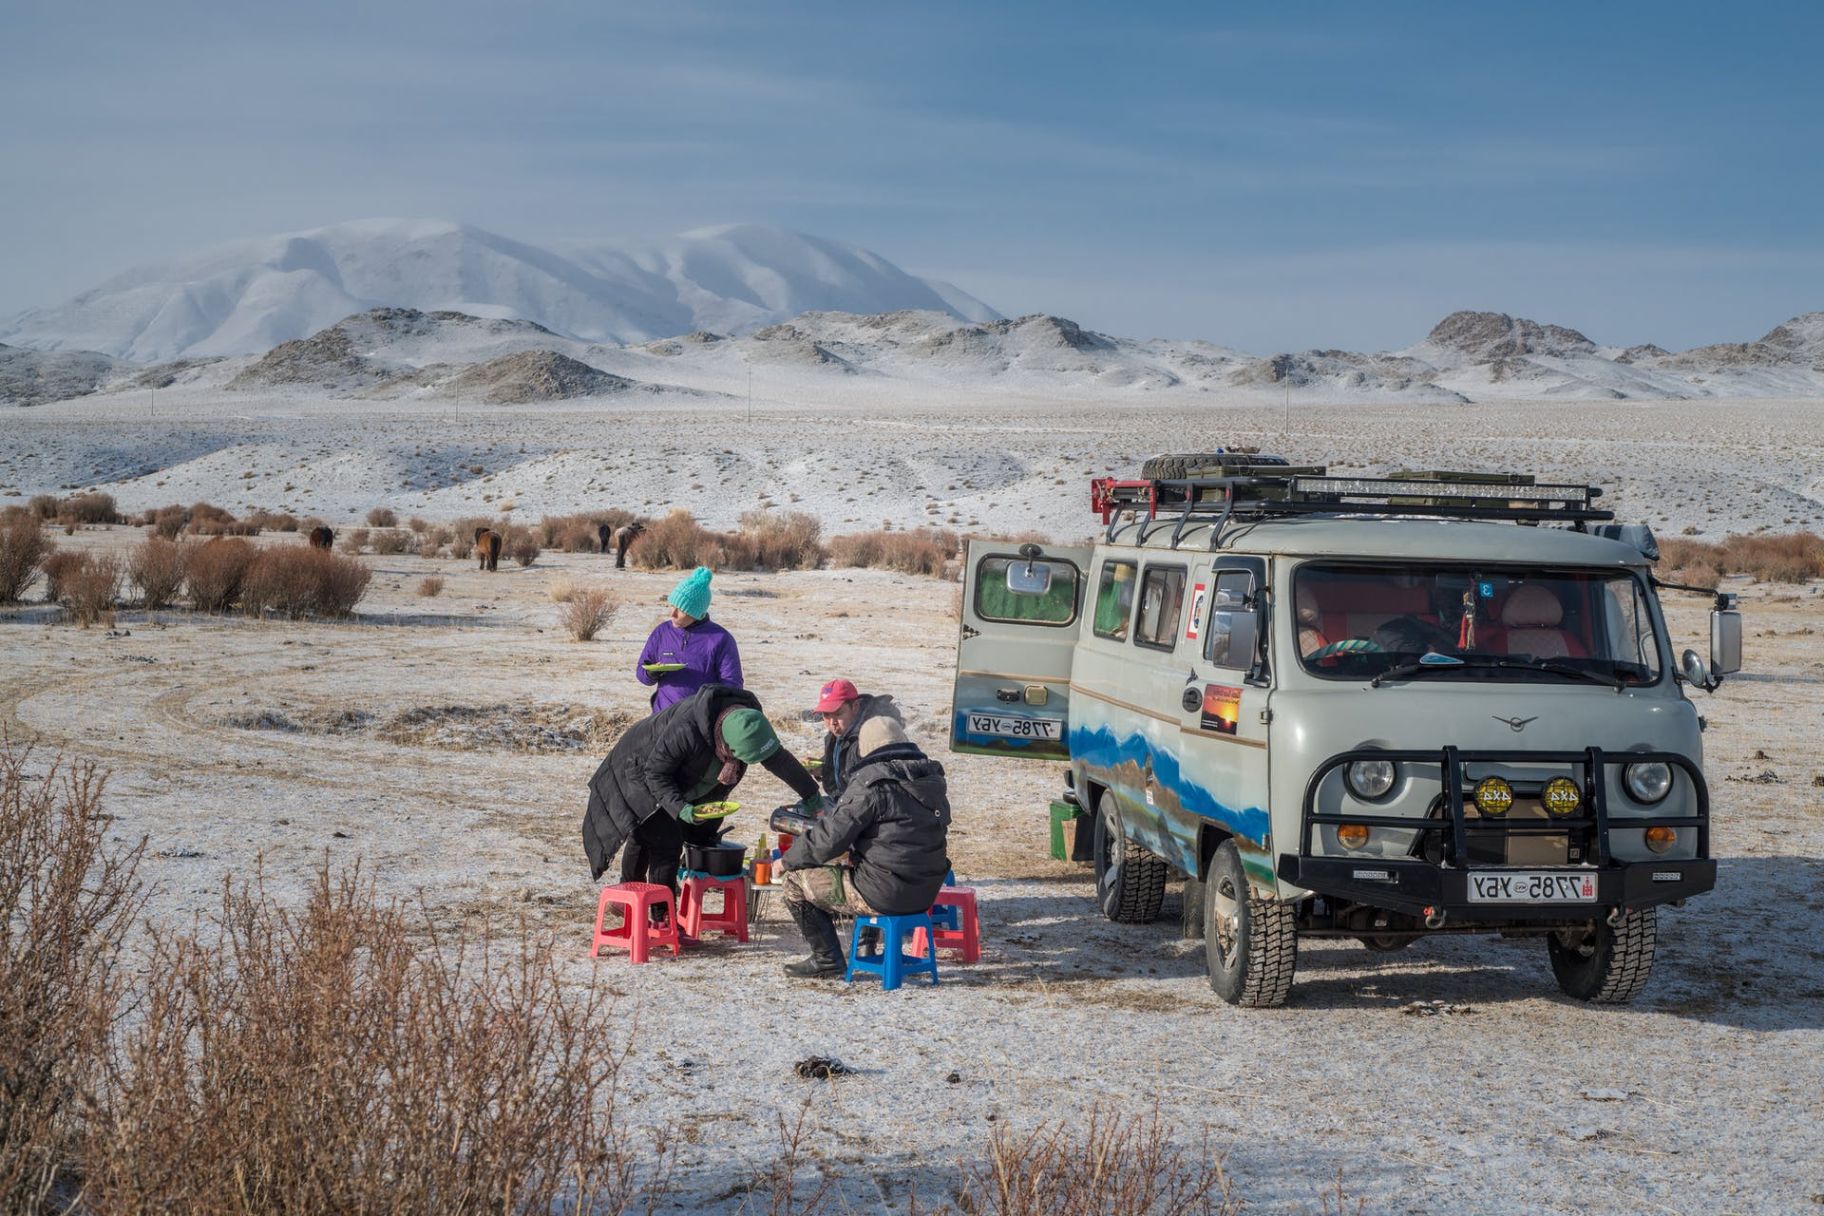 People eating lunch in the Mongolian desert, next to a van 